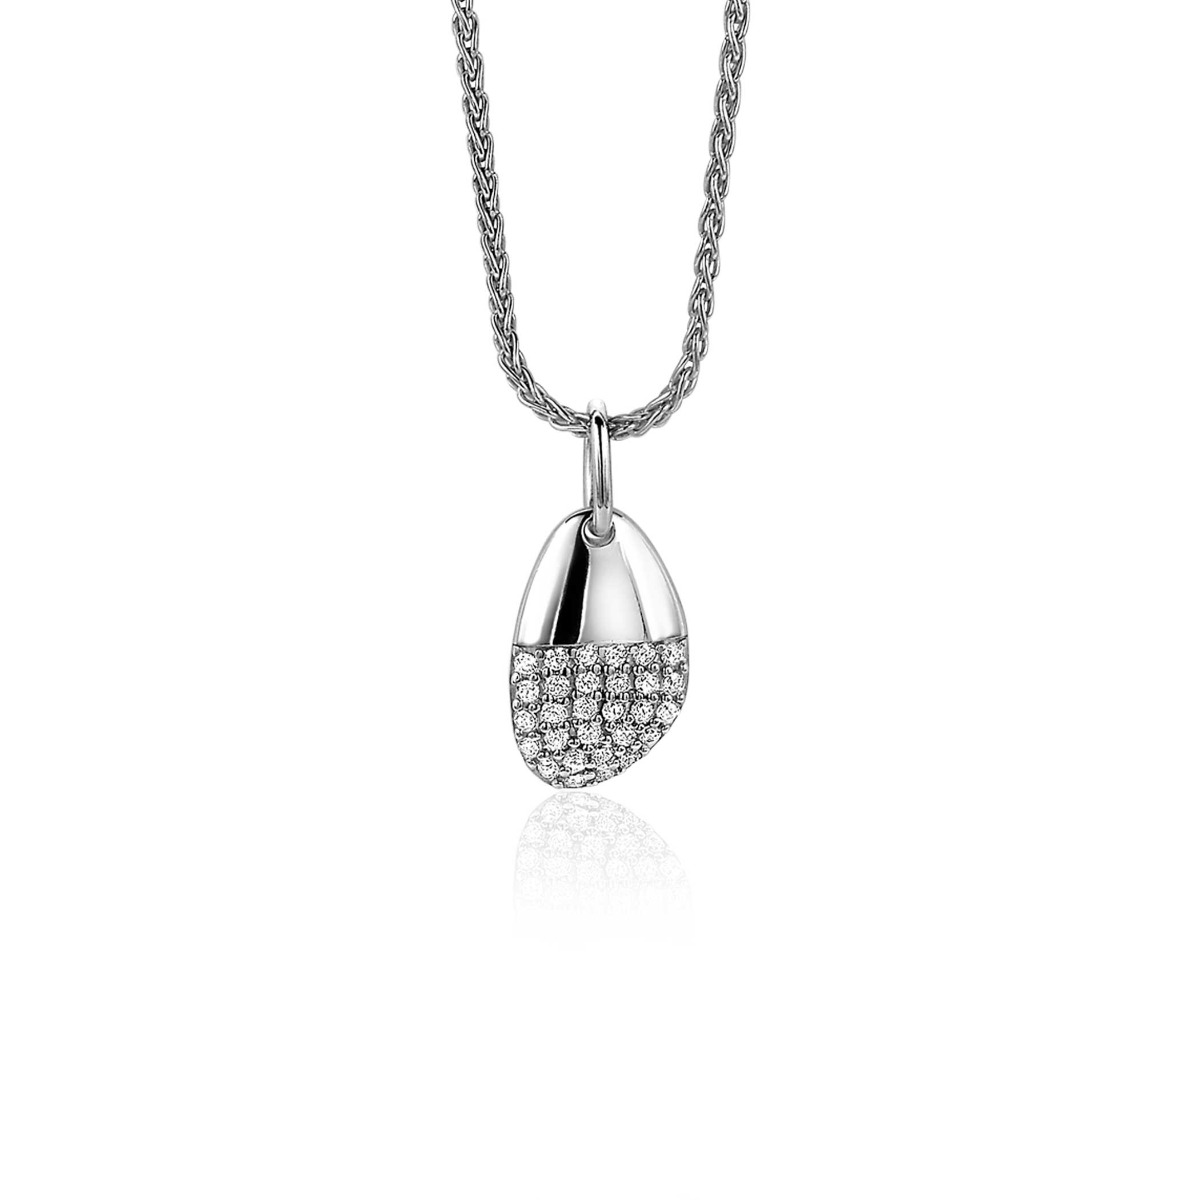 ZINZI Sterling Silver Fantasy Pendant Oval with White Zirconias ZIH-BF20 (excl. necklace)